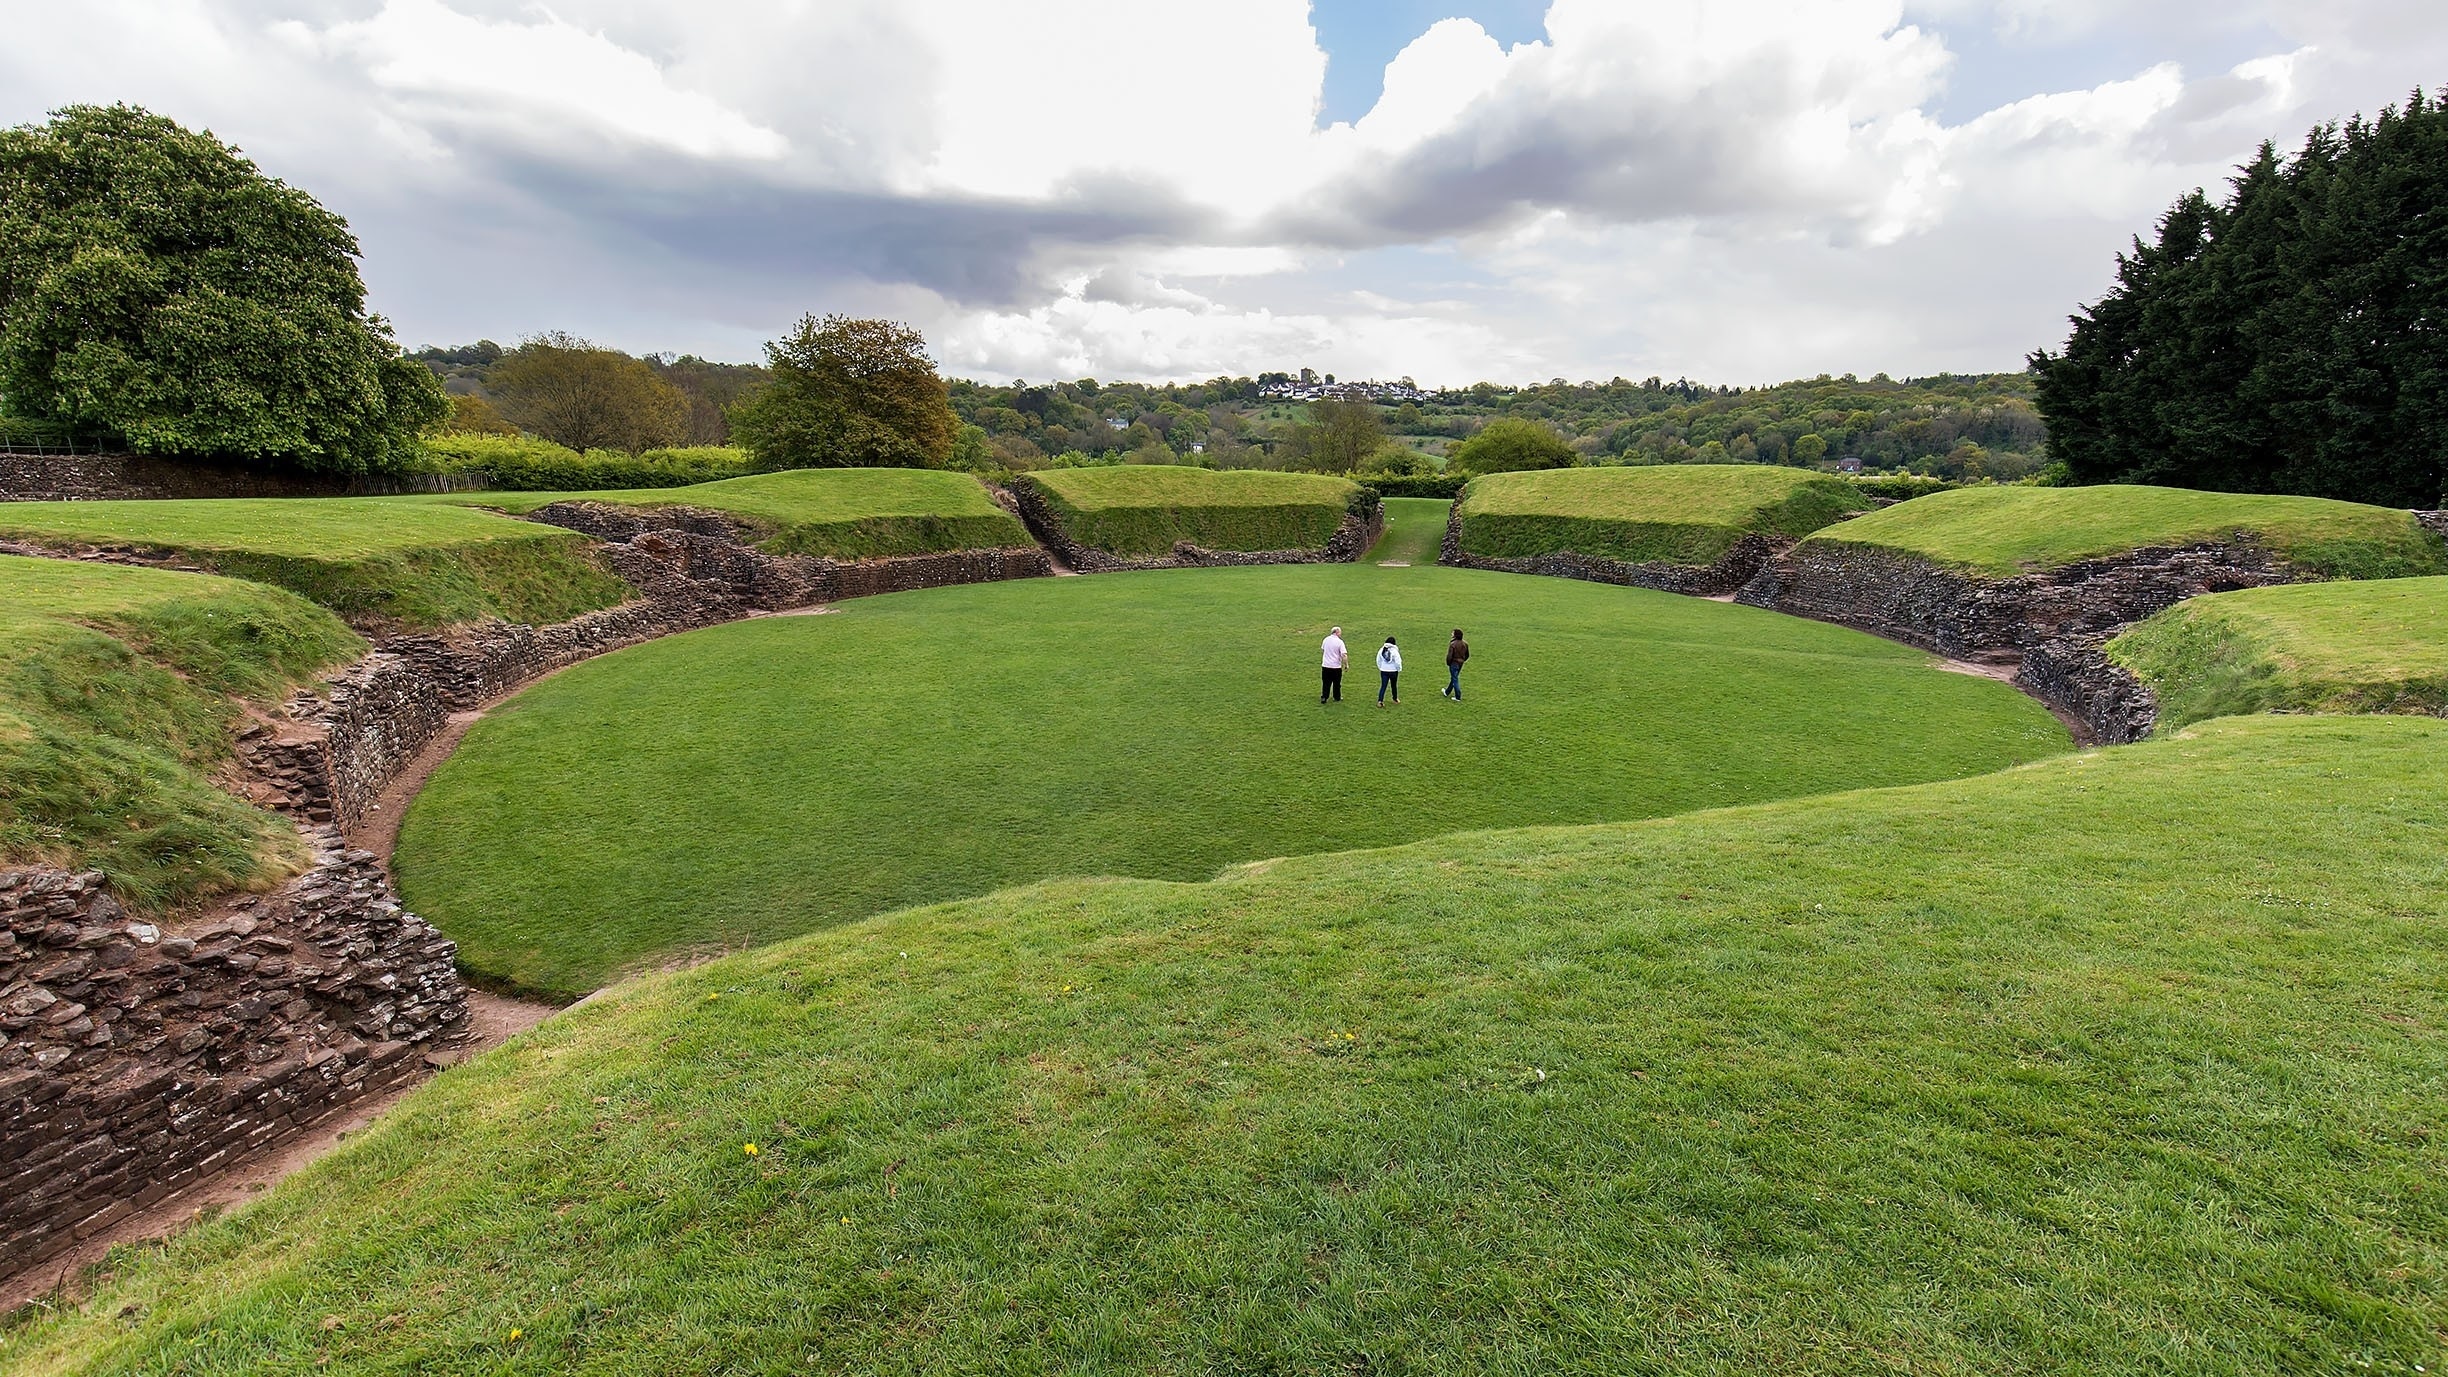 Well-preserved oval mound that once hosted gladiatorial combat and military processions. This amphitheater was built for the Roman forces at Isca around AD 90 and would have seated around 6000 spectators!